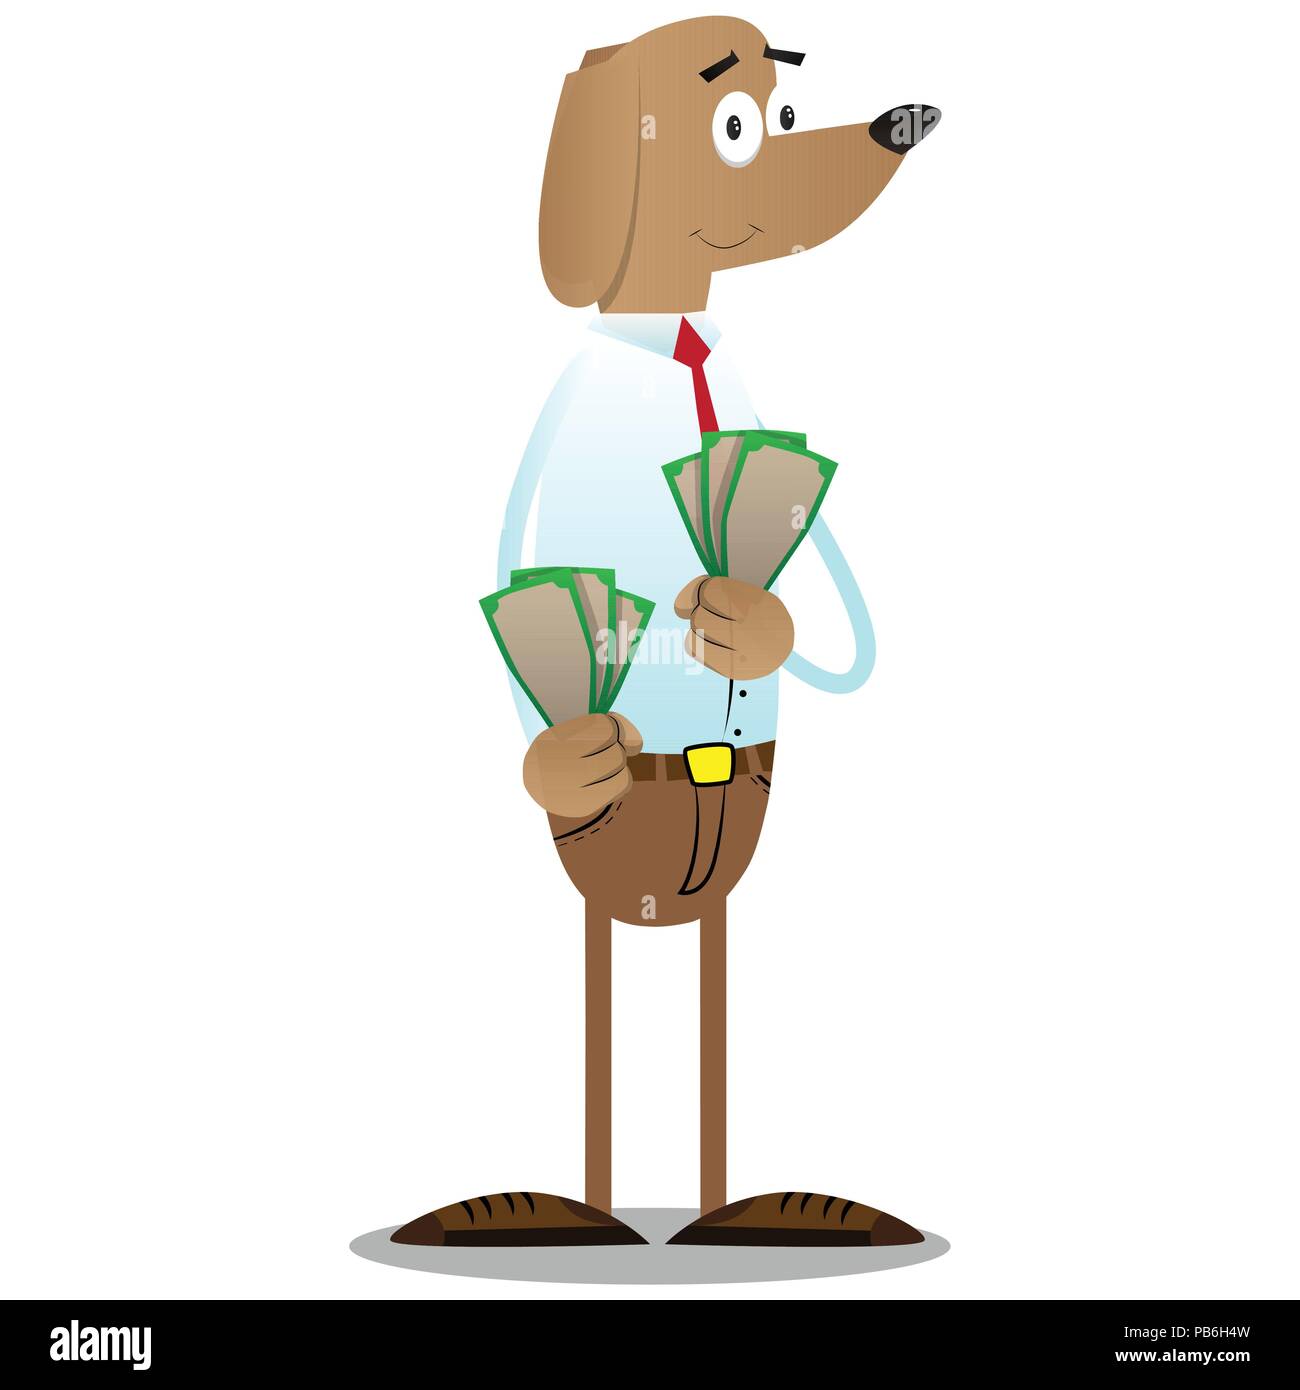 Cartoon illustrated business dog holding or showing money bills. Stock Vector